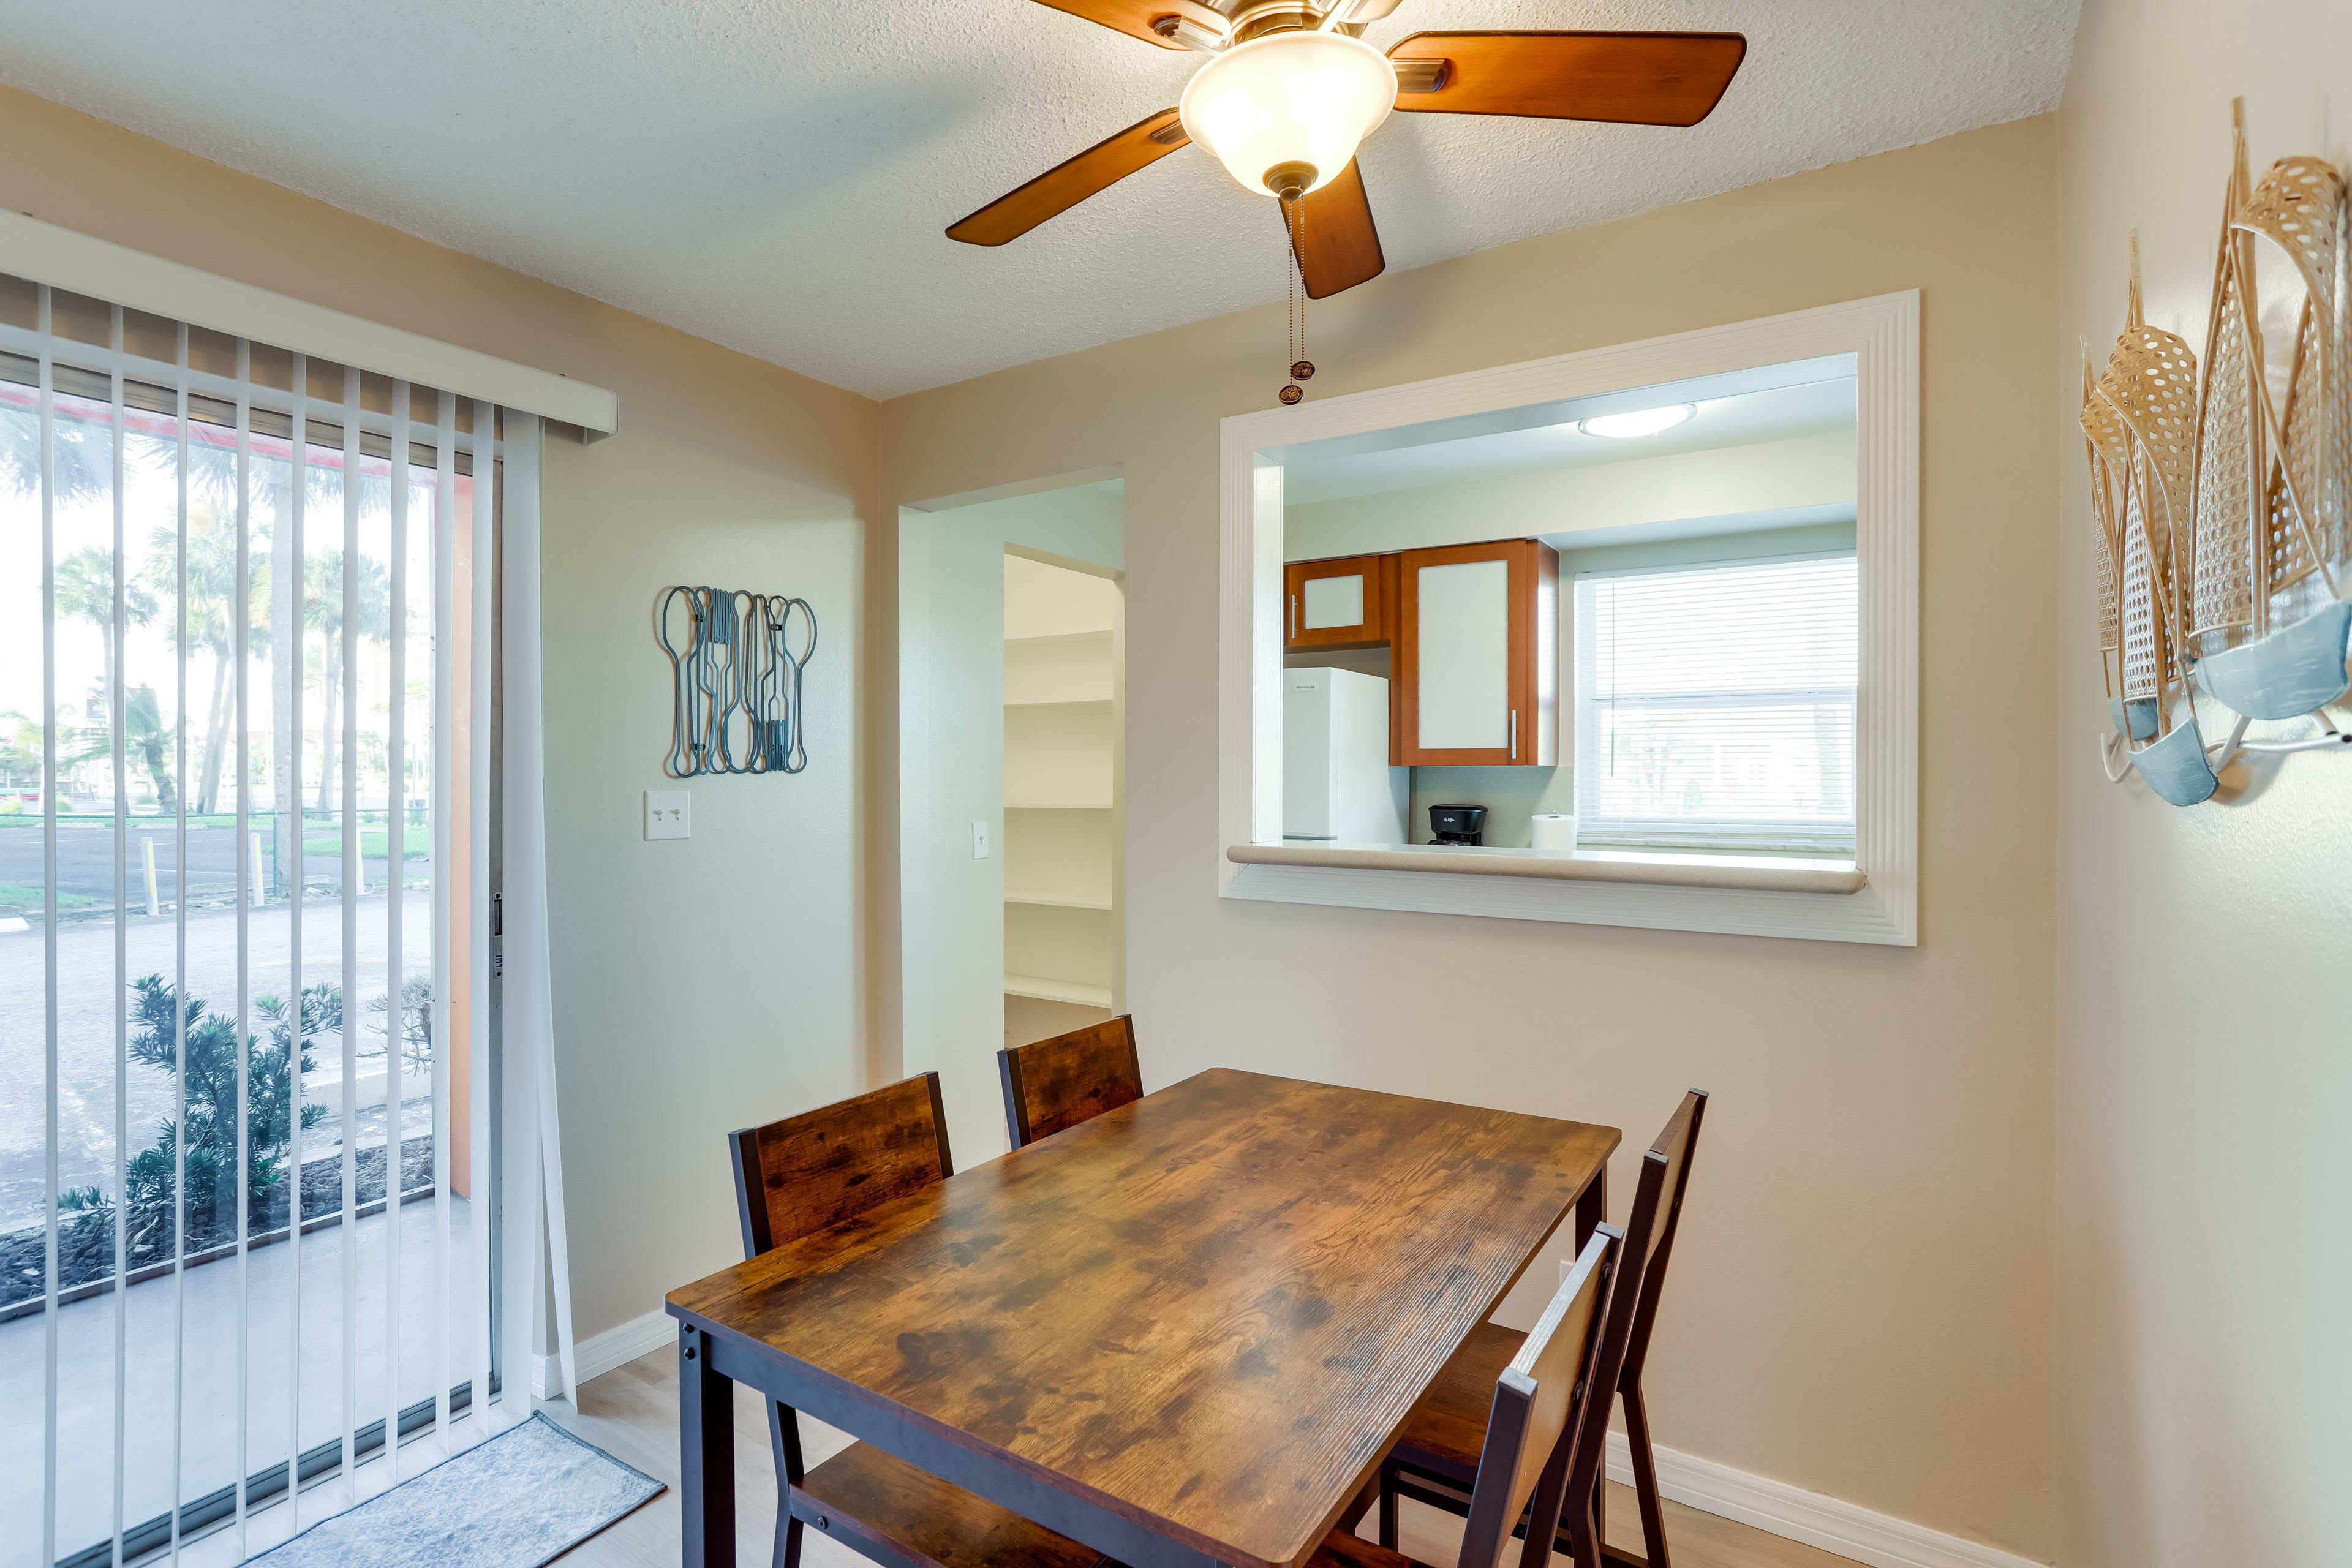 Dining Area | Dishware/Flatware Provided | Central A/C